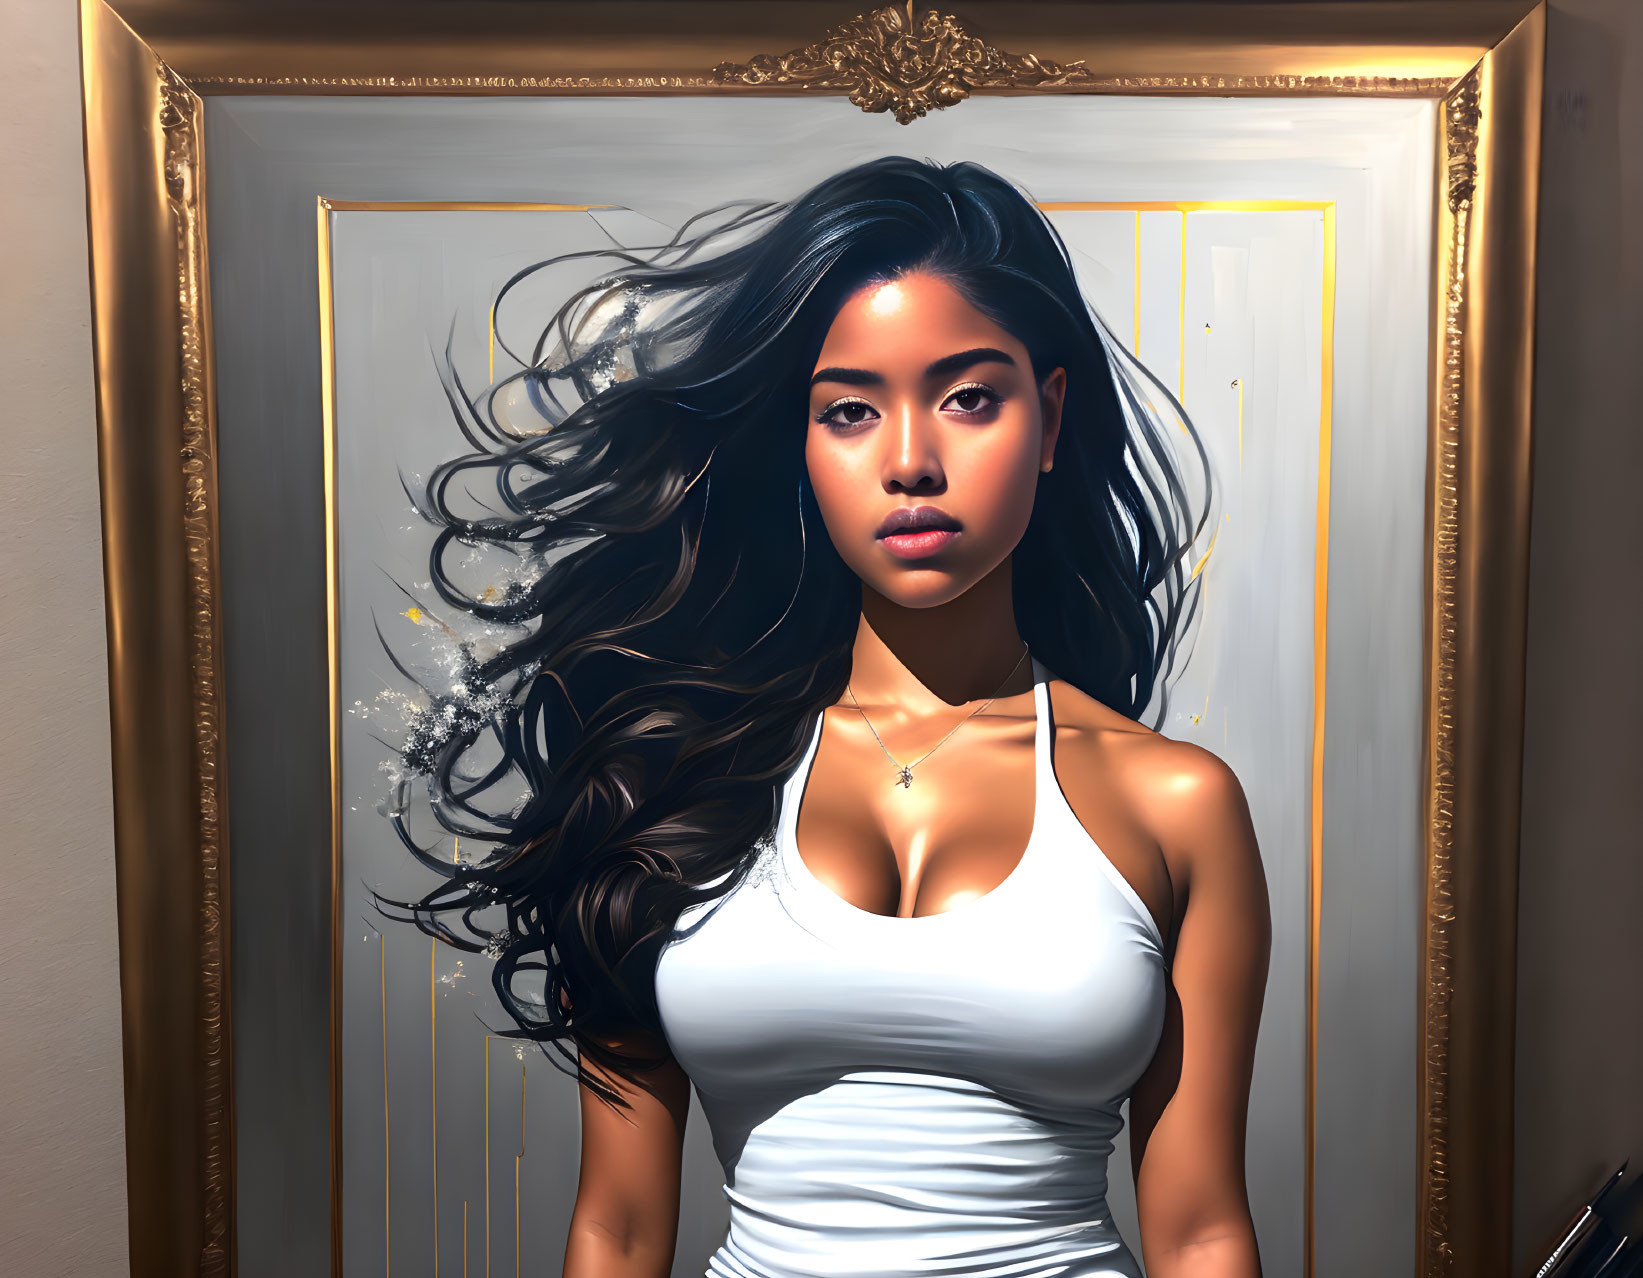 Illustrated portrait of woman with flowing hair in white tank top against framed background